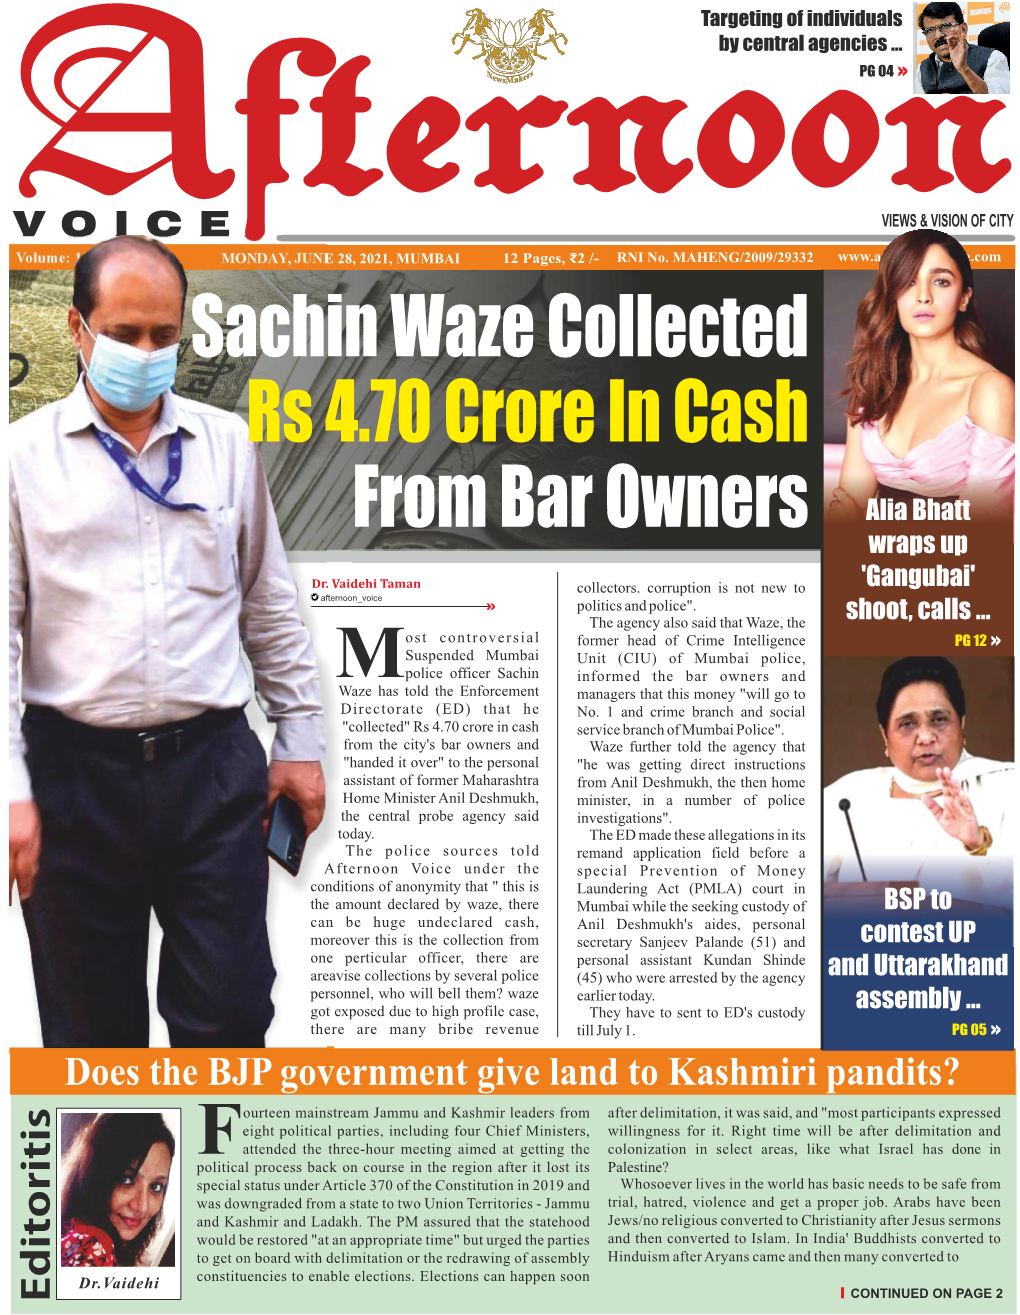 Sachin Waze Collected Rs 4.70 Crore in Cash from Bar Owners